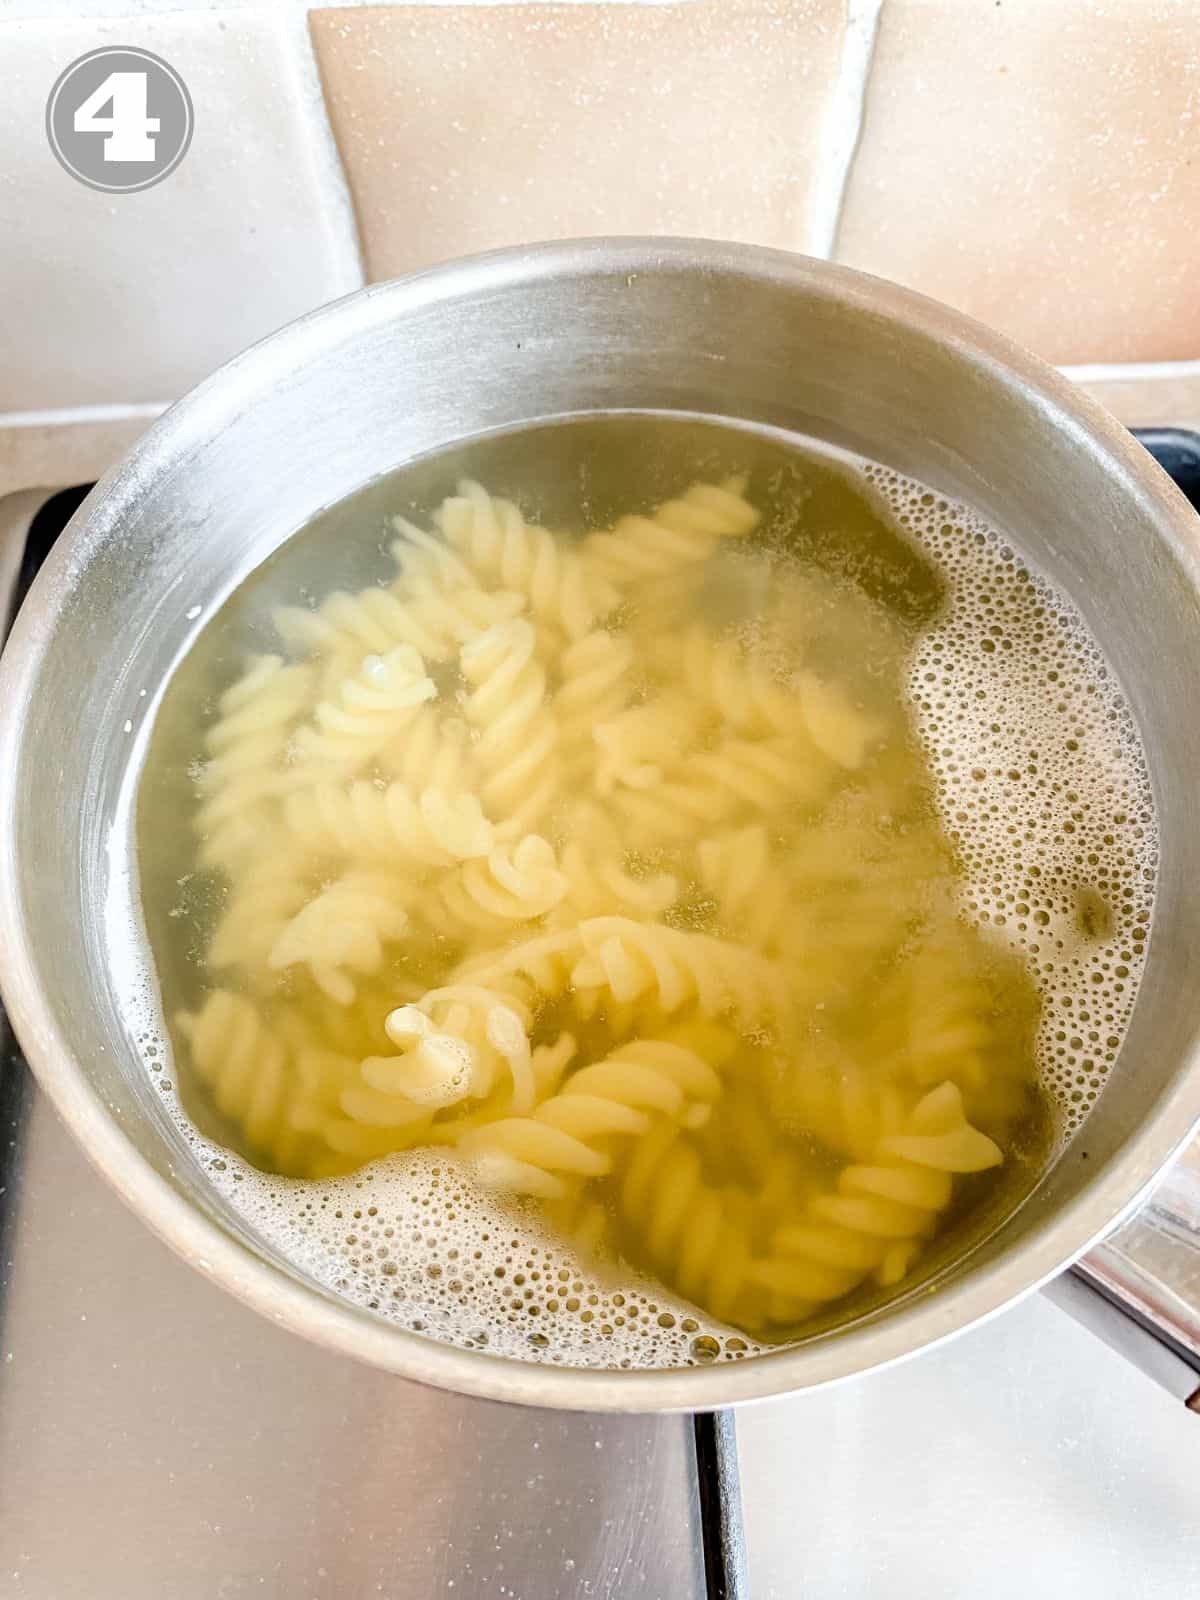 pasta being cooked in a pot.